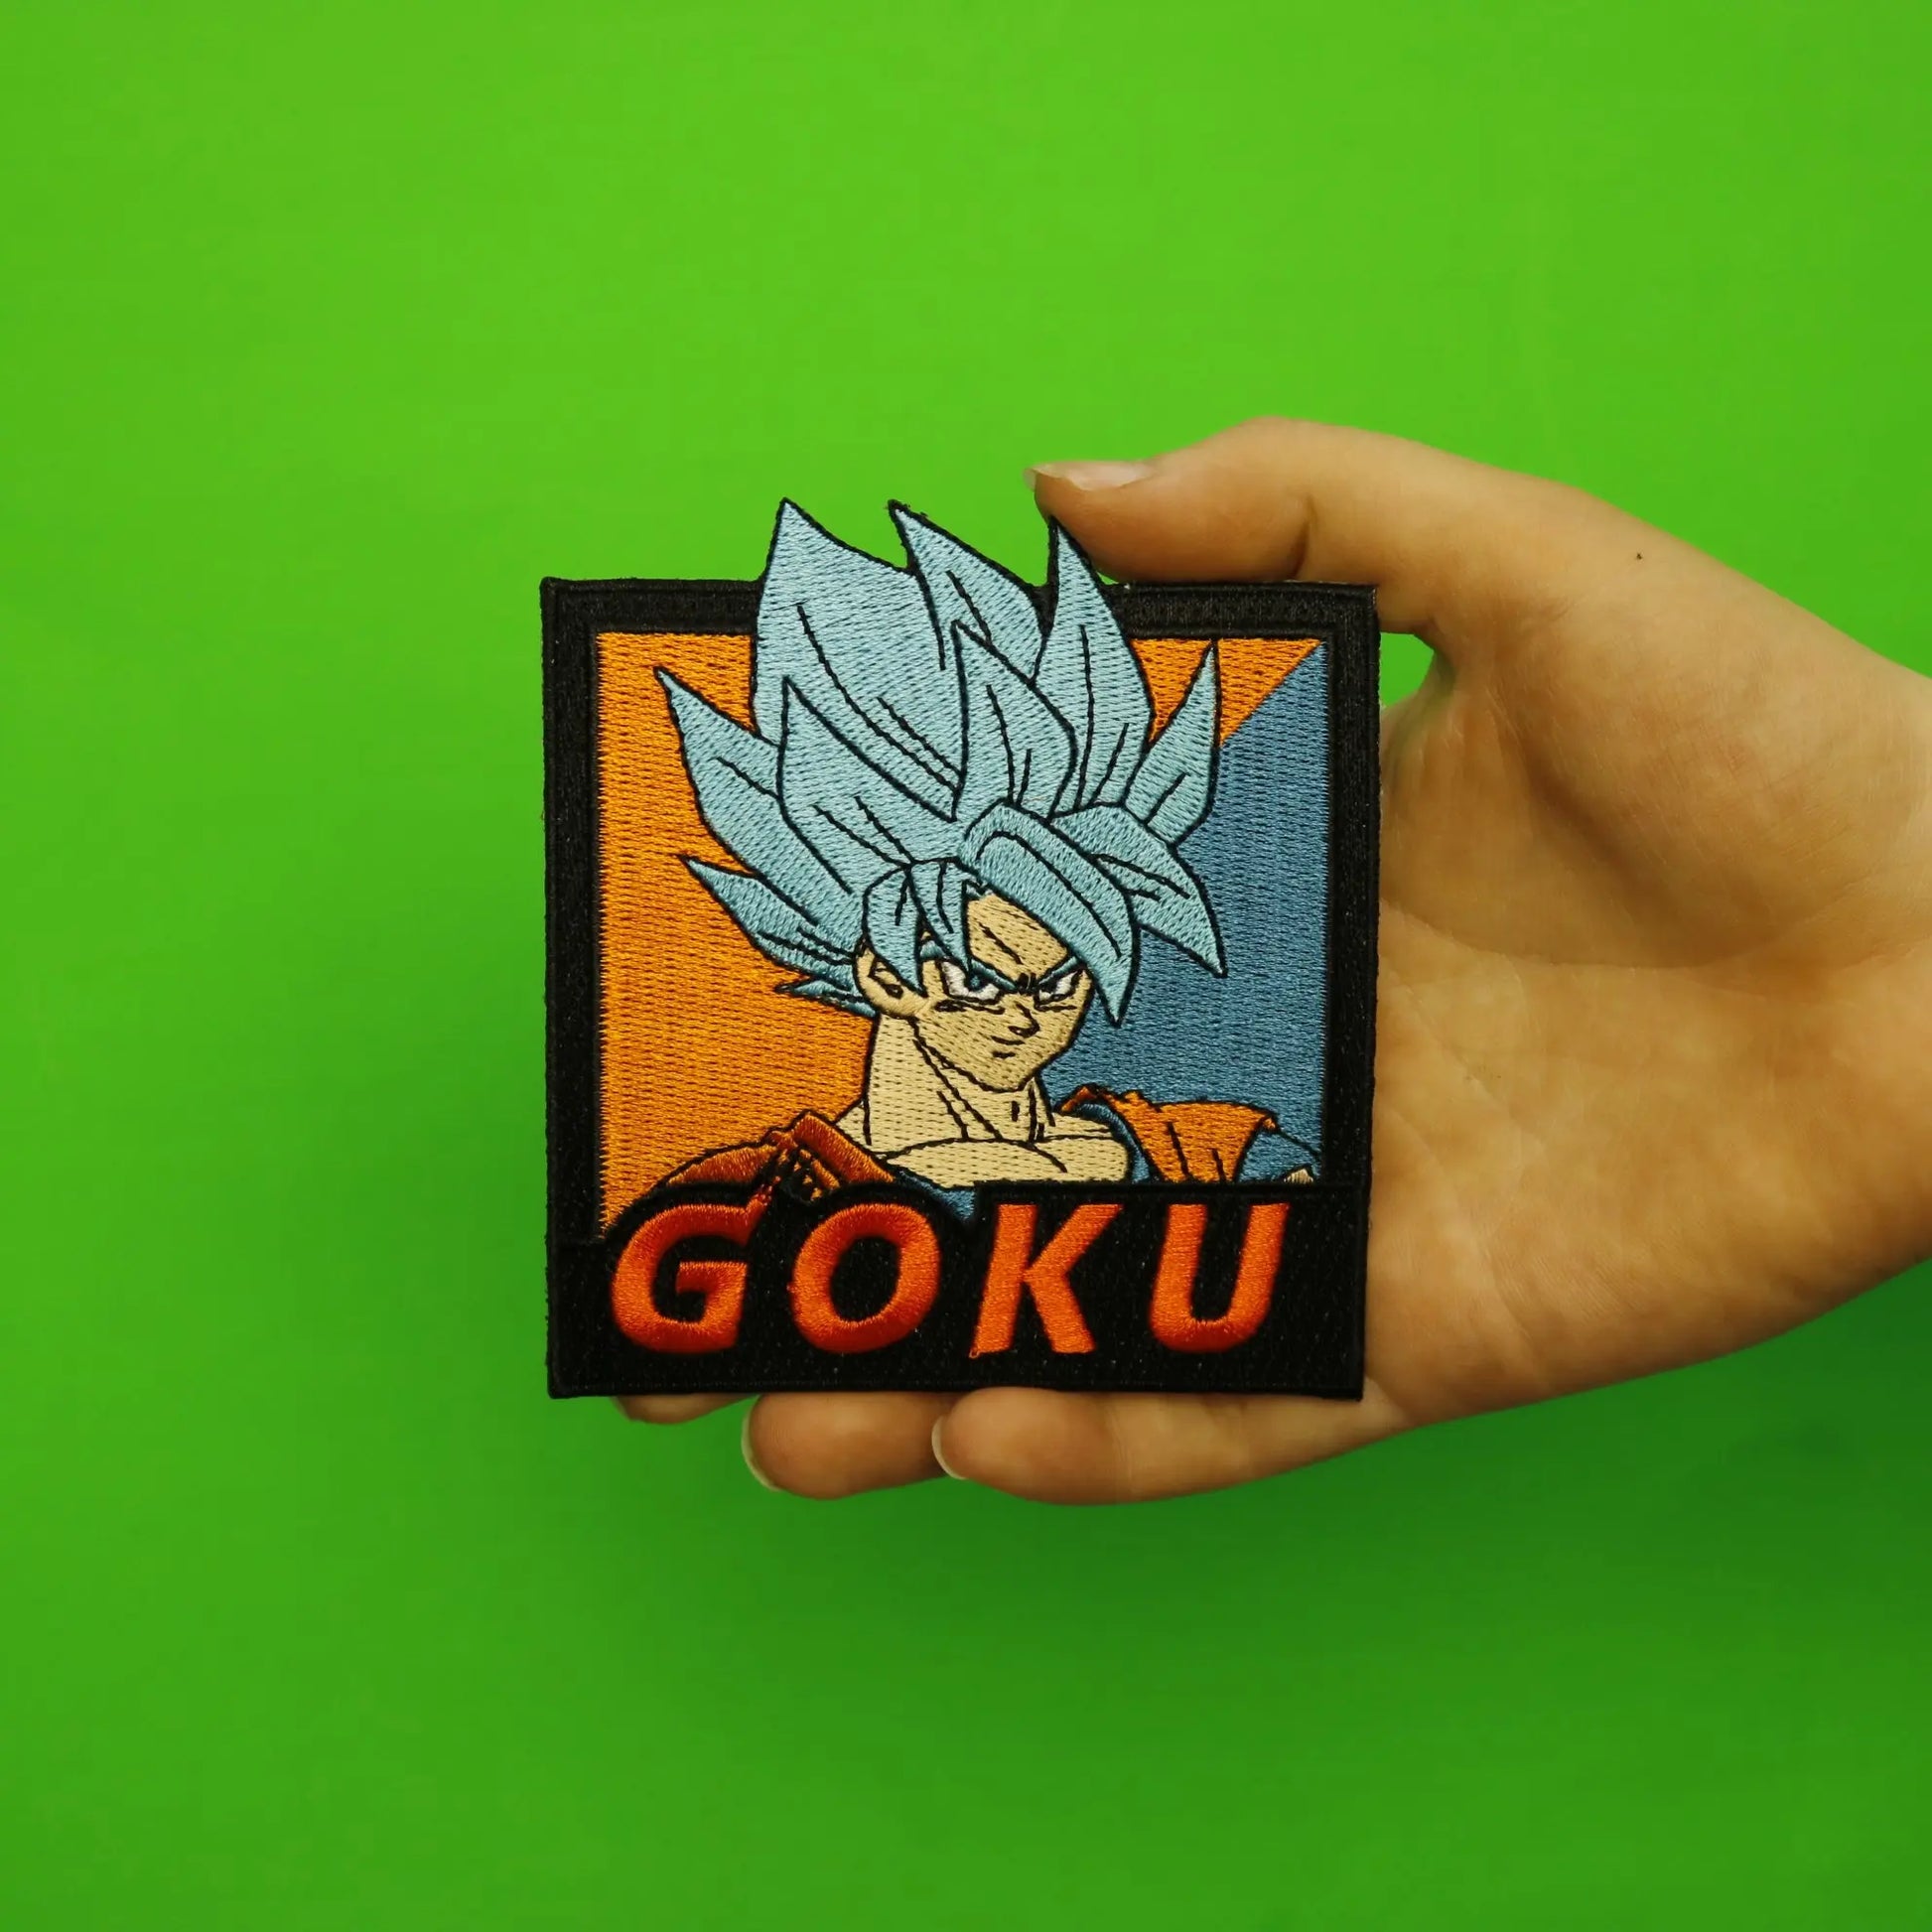 Dragon Ball Super Broly SSGSS Goku Anime Square Embroidered Patch 